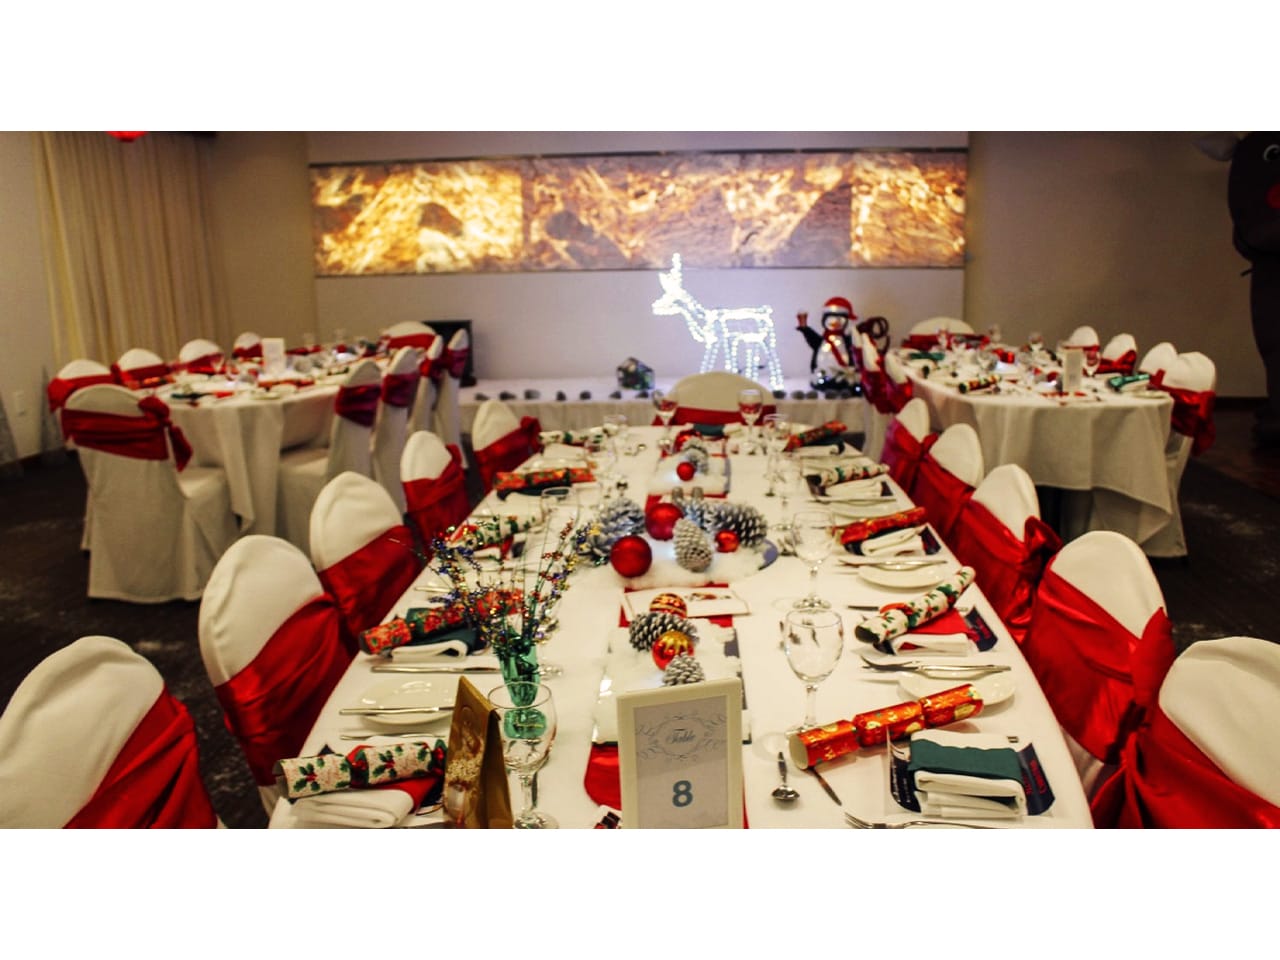 Red and white chairs at long white tables